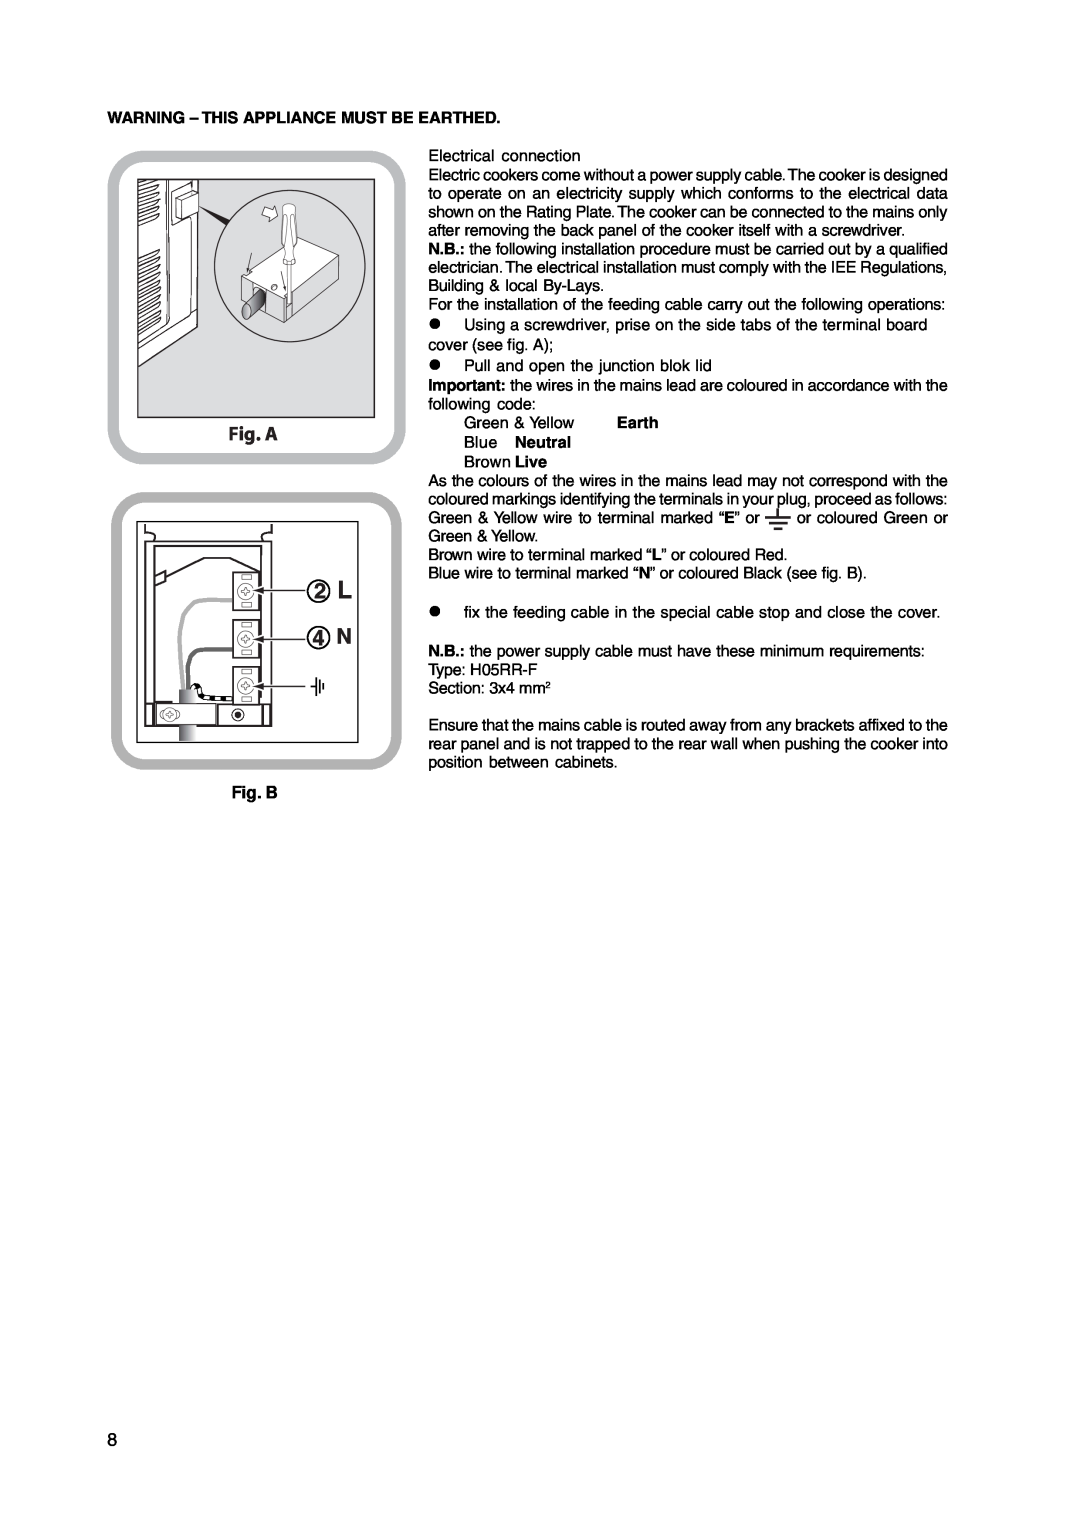 Hotpoint GW38P, GW38G, GW38K, GW38X manual 2 L, Fig. A, Fig. B, Warning - This Appliance Must Be Earthed, Blue Neutral 